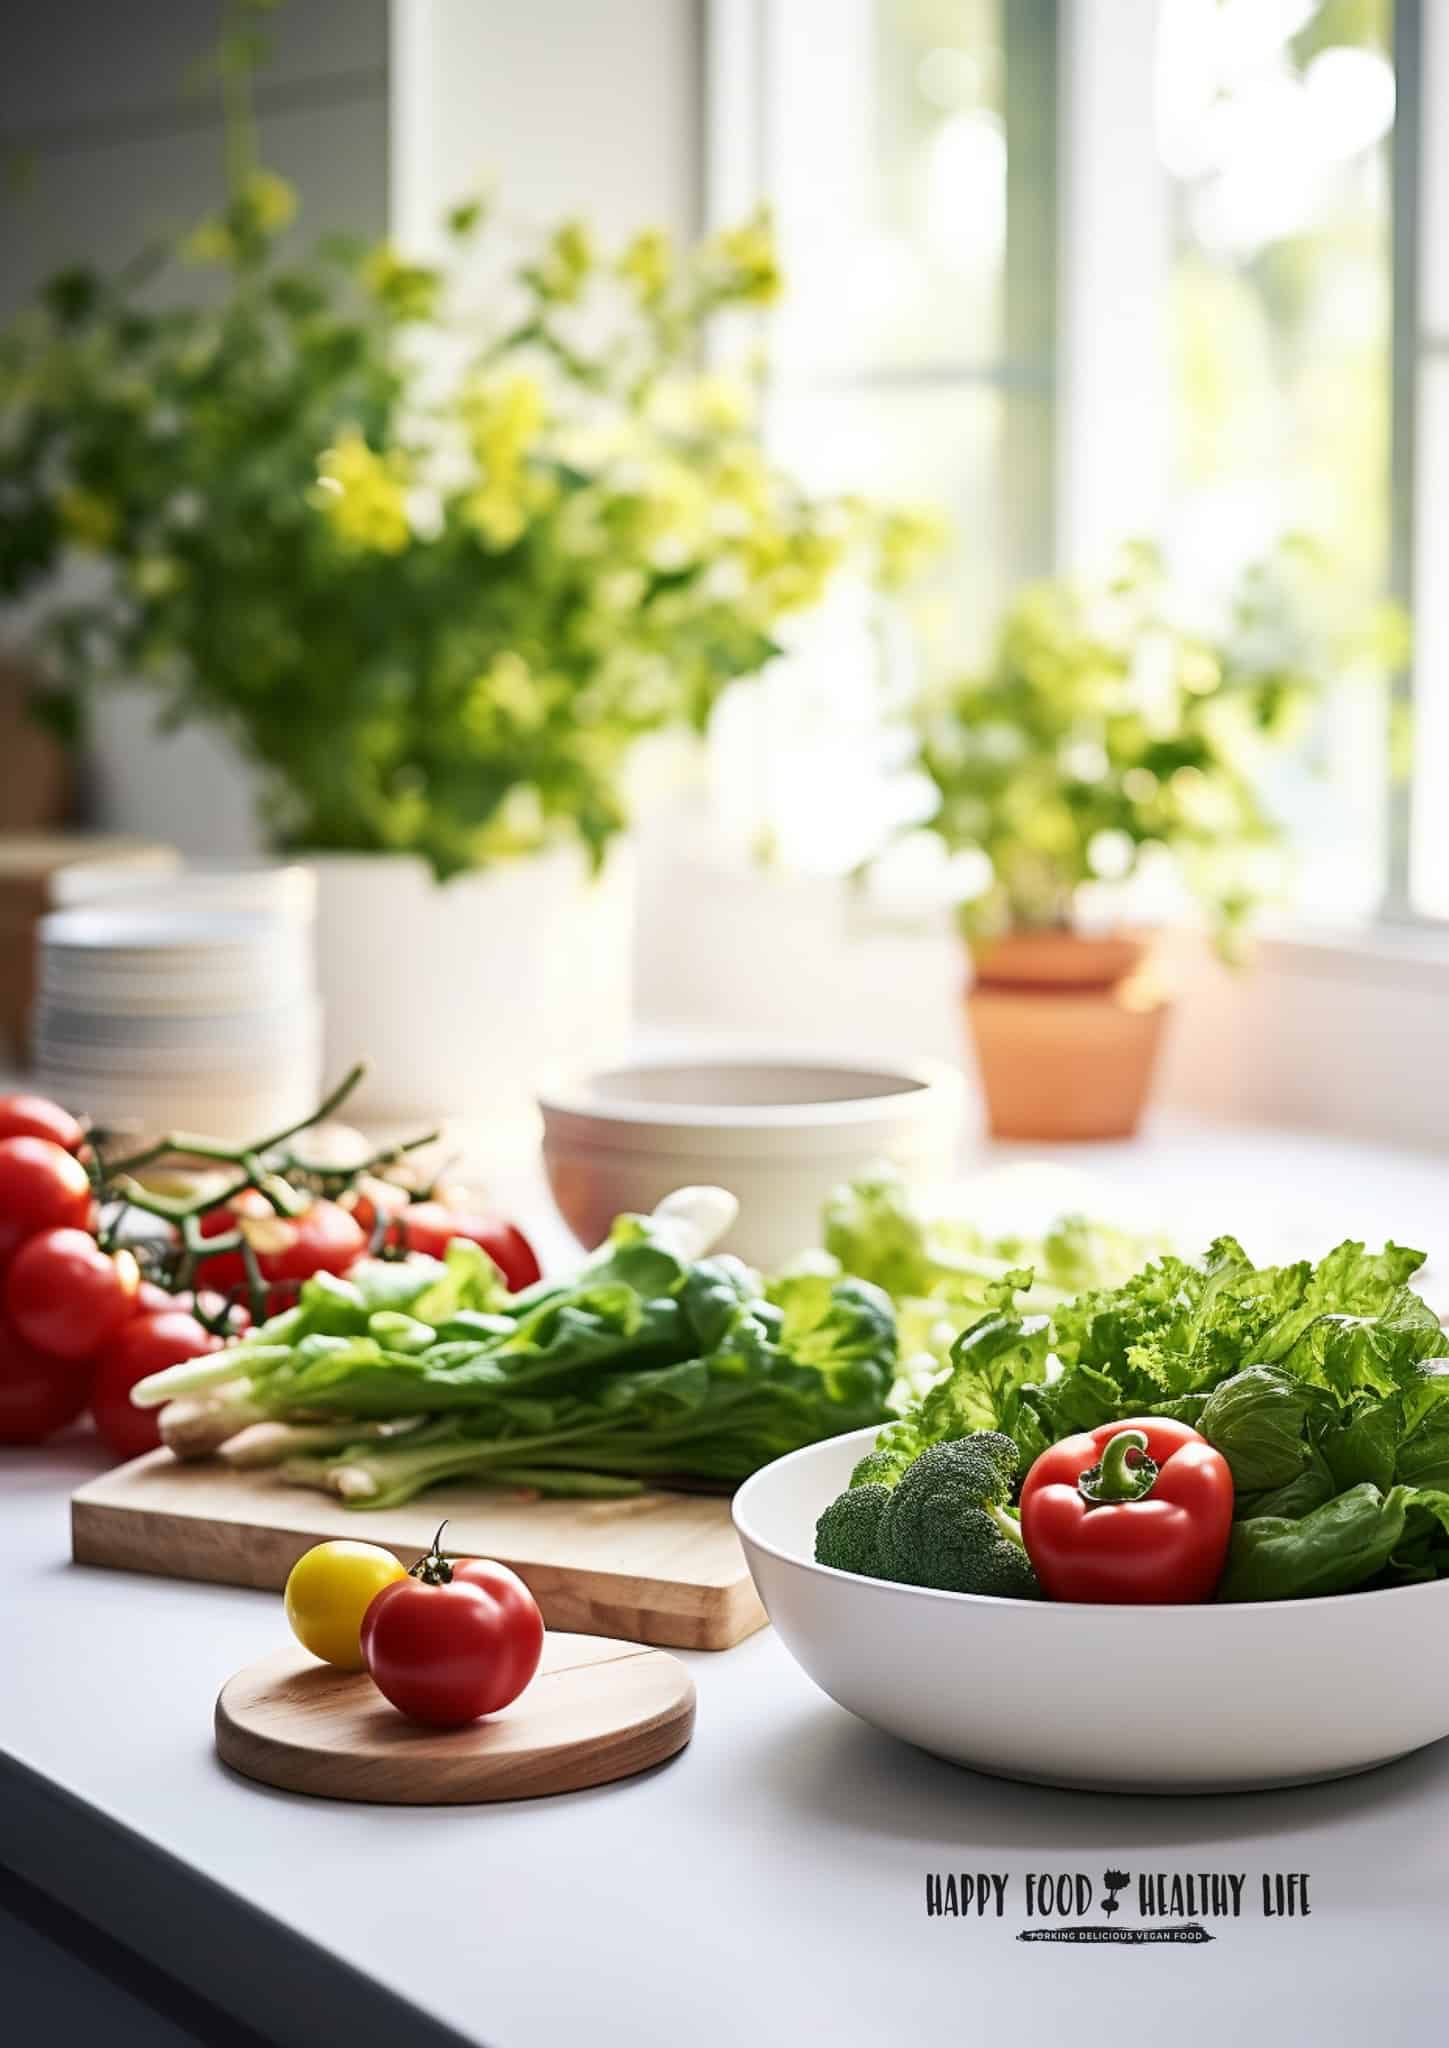 A kitchen counter that is light in color in front of a open window with lots of light coming in. The window sill has lots of plants but they are blurred in the photo. The counter is full of colorful fruits and vegetables such as broccoli, bell peppers, button mushrooms, lettuce, tomatoes, raspberries